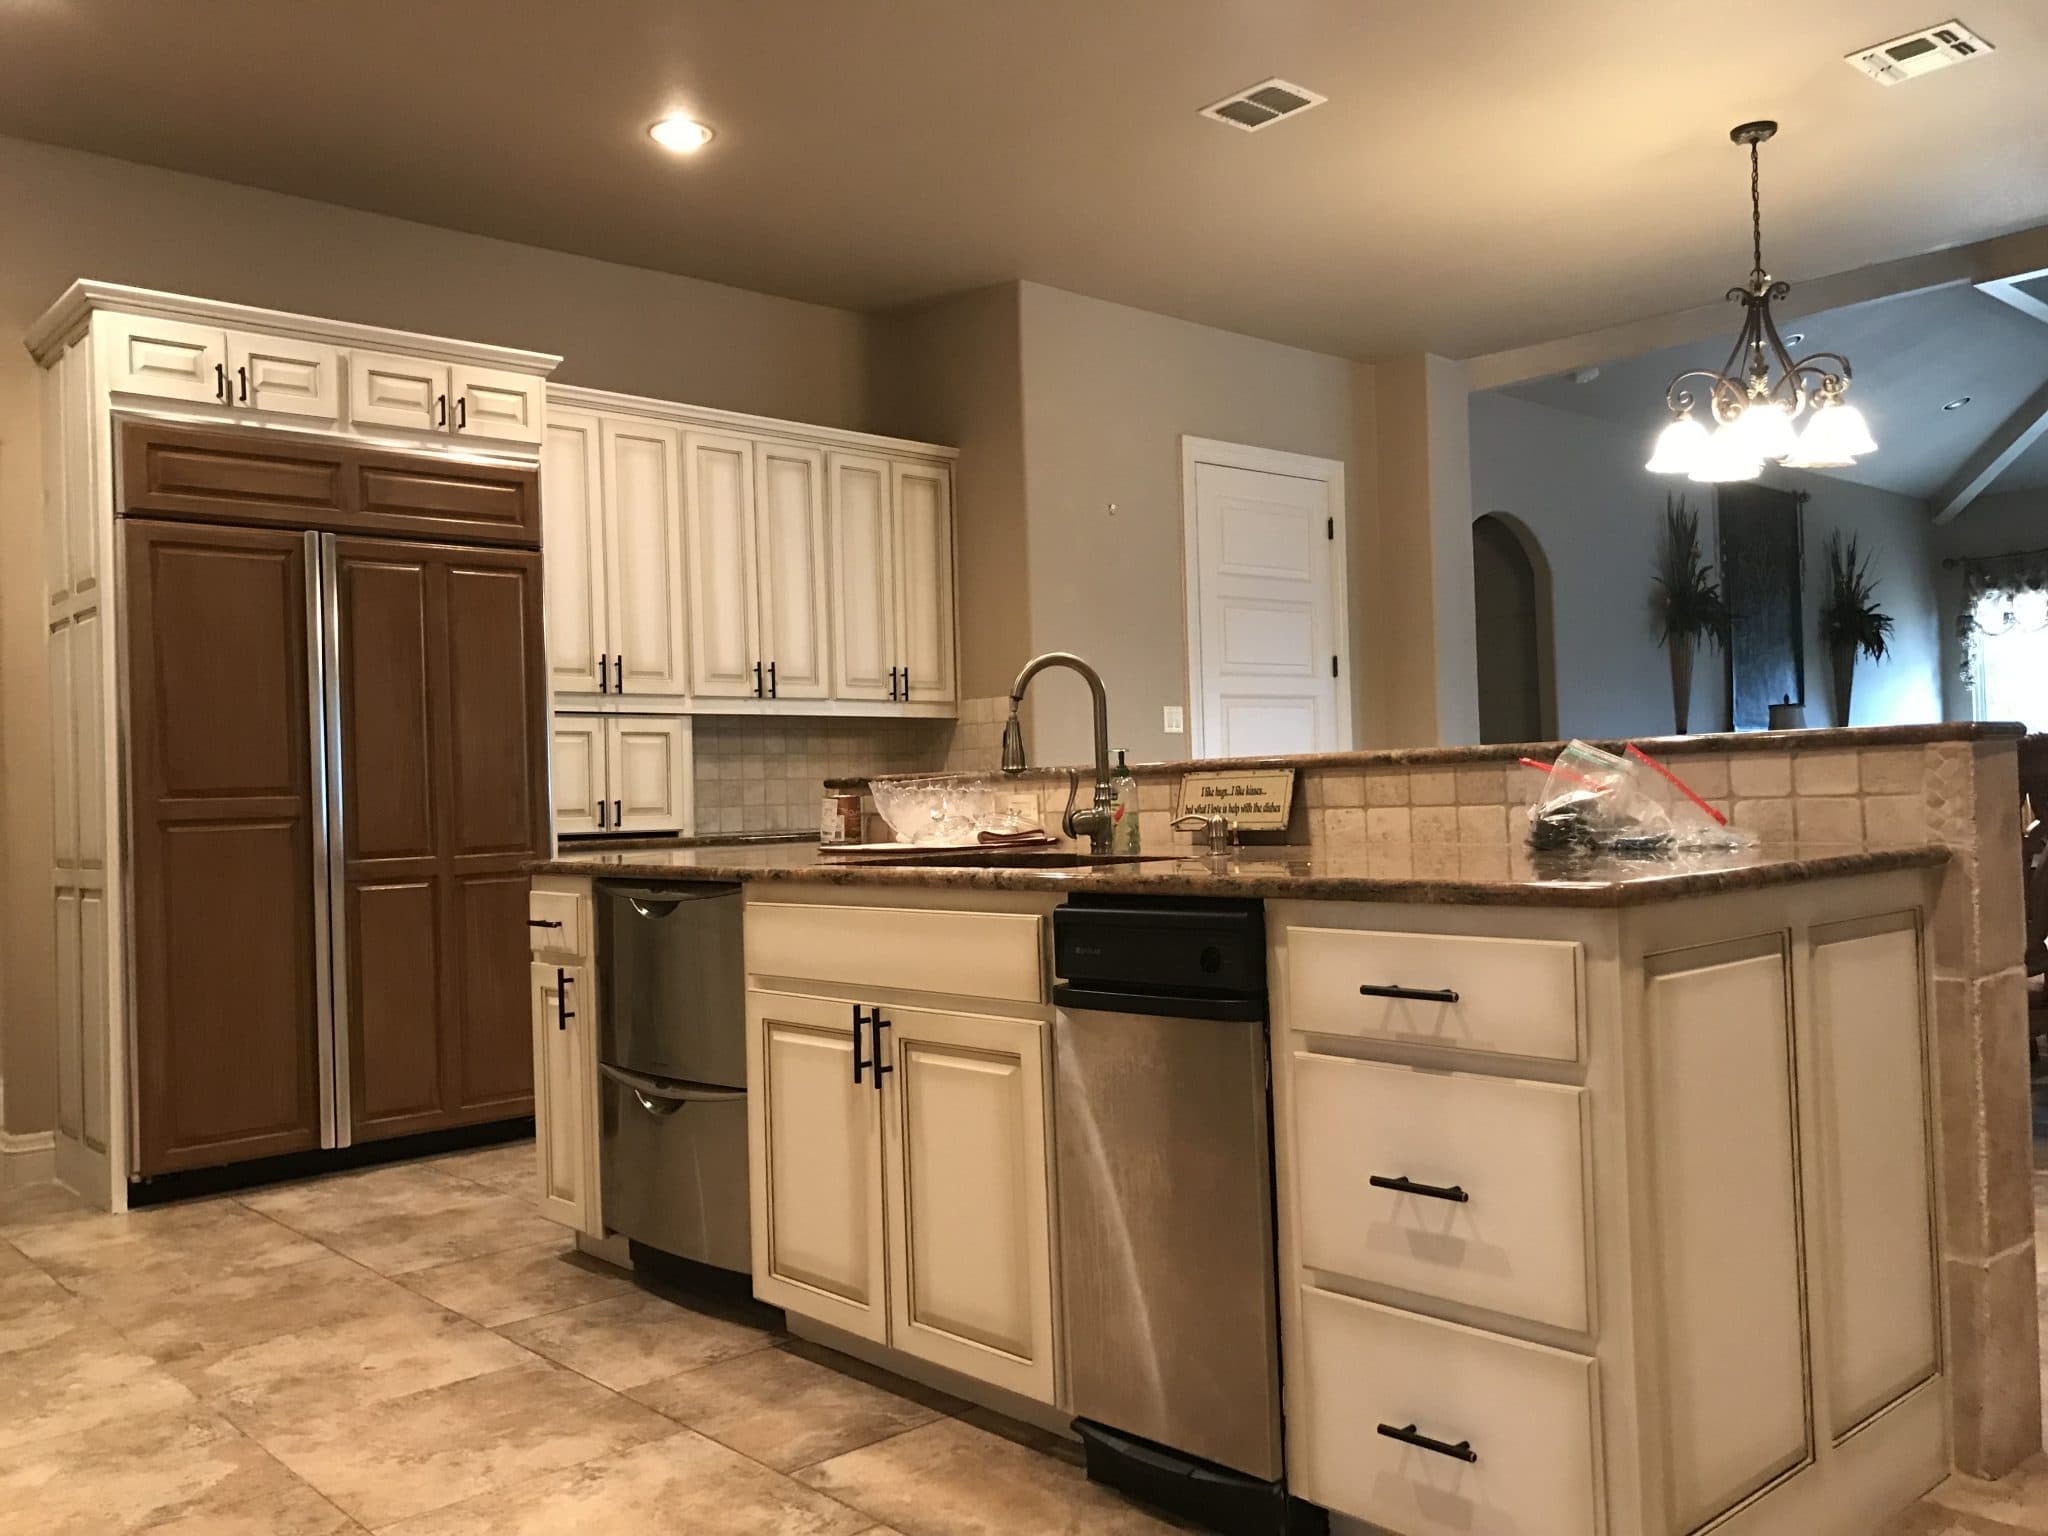 Cabinet Painting Refinishing In San